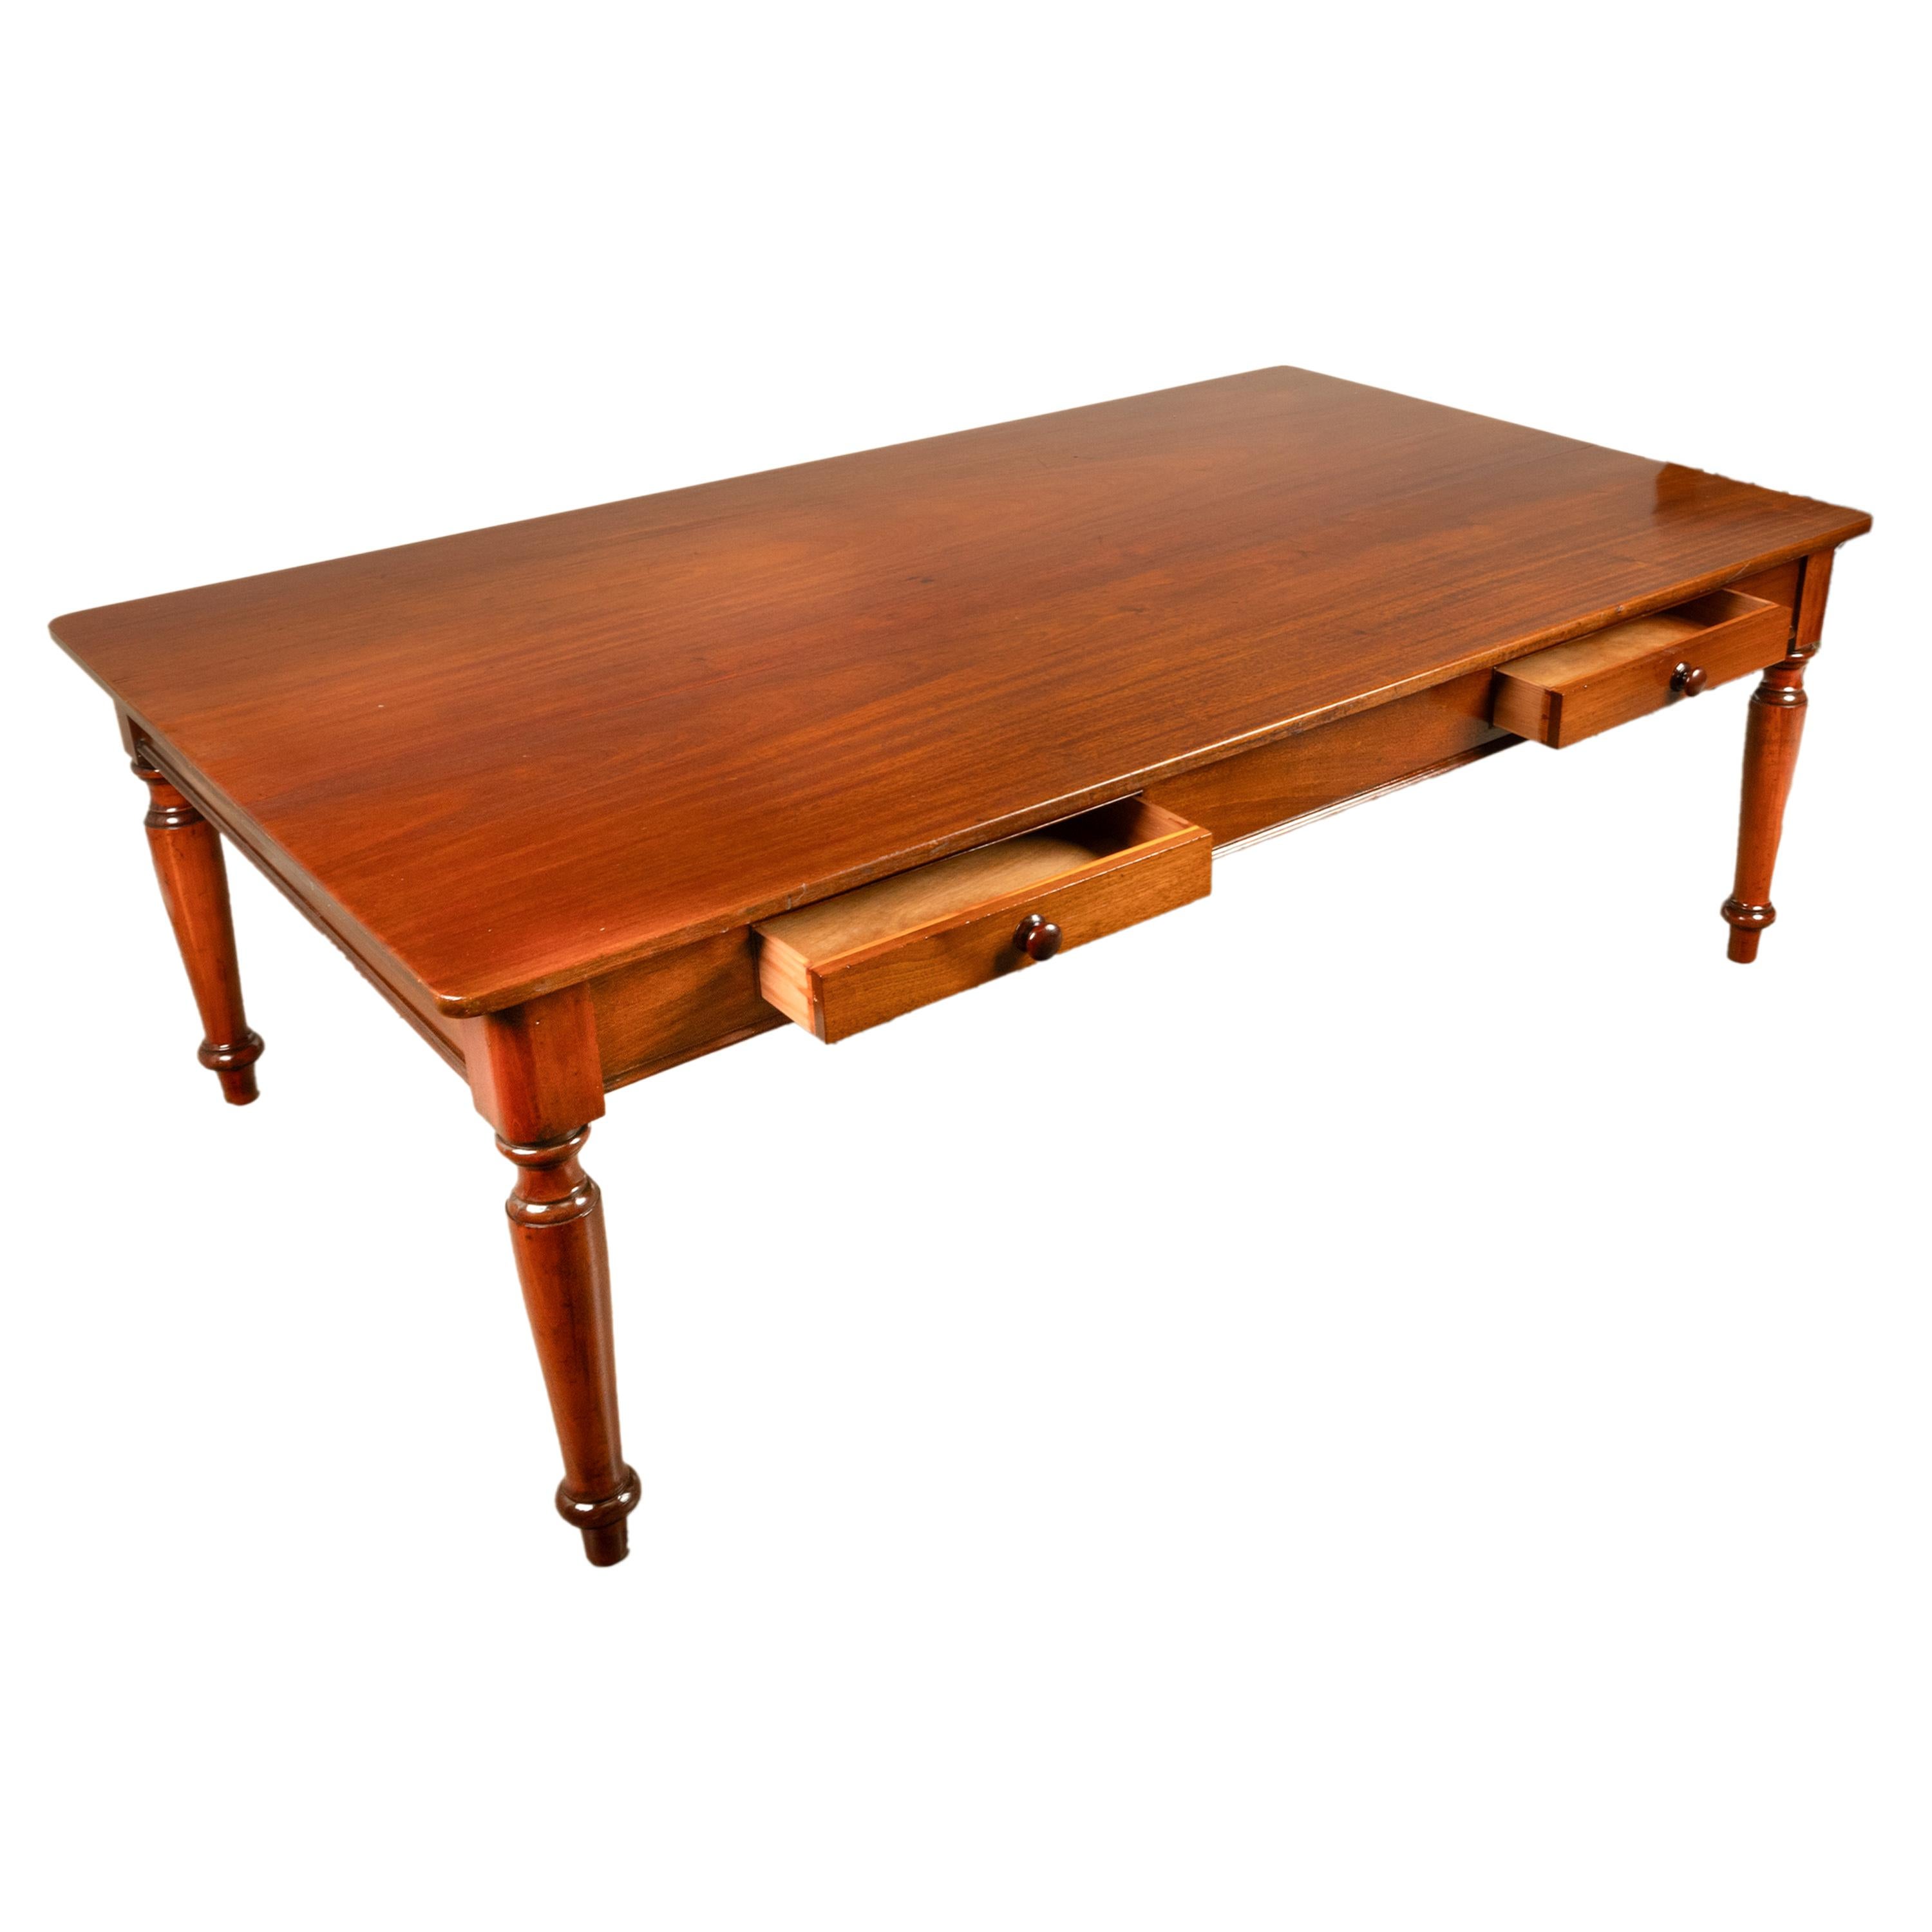 Mid-19th Century Antique Monumental 19th Century Mahogany Library Conference Dining Table 1860 For Sale